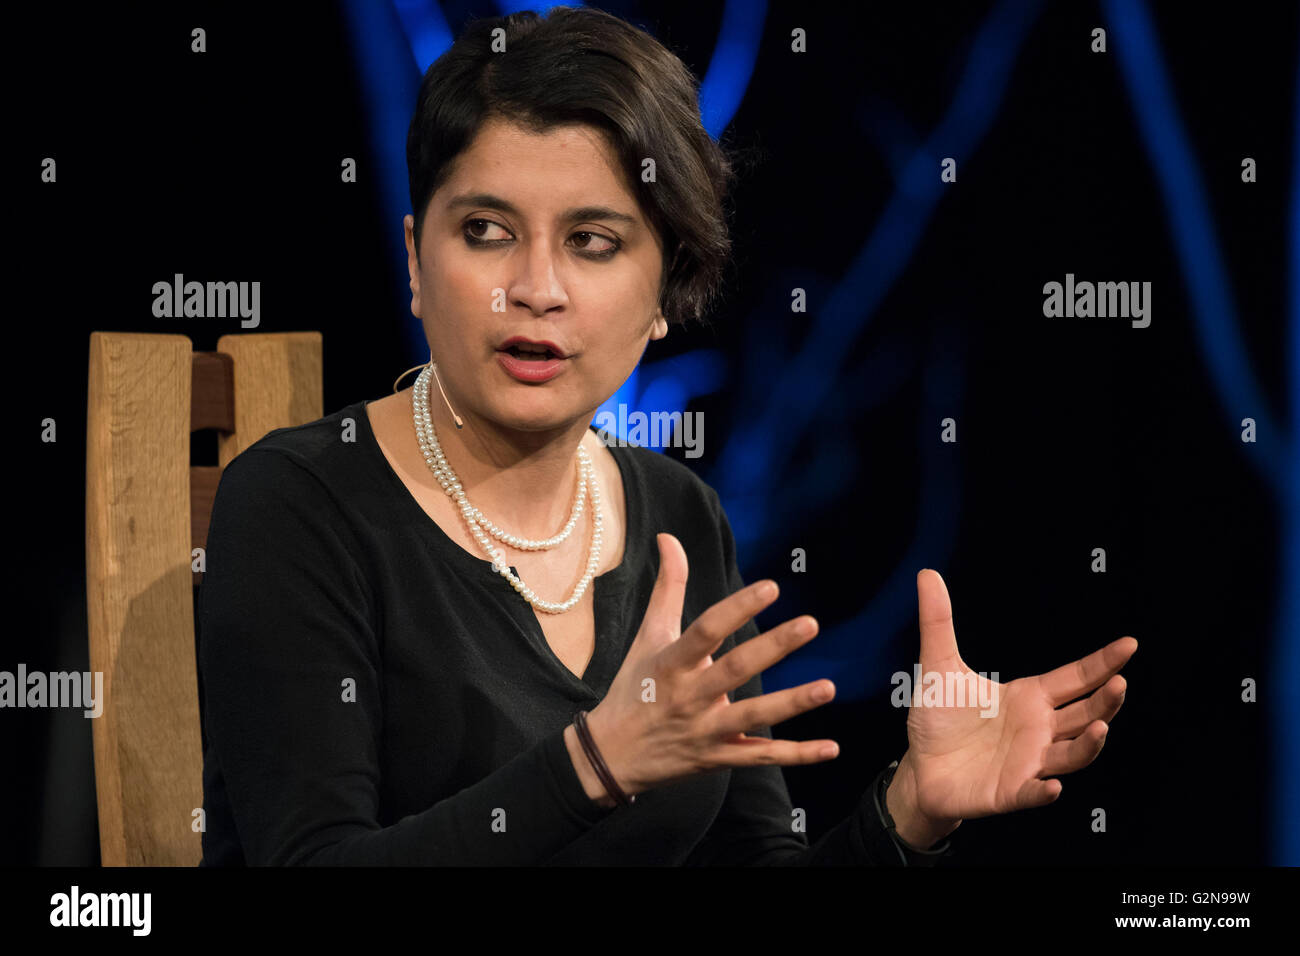 Shami Chakrabarti formerly of human rights organisation Liberty at the 2016 hay festival in Hay-on-Wye, Wales. Stock Photo